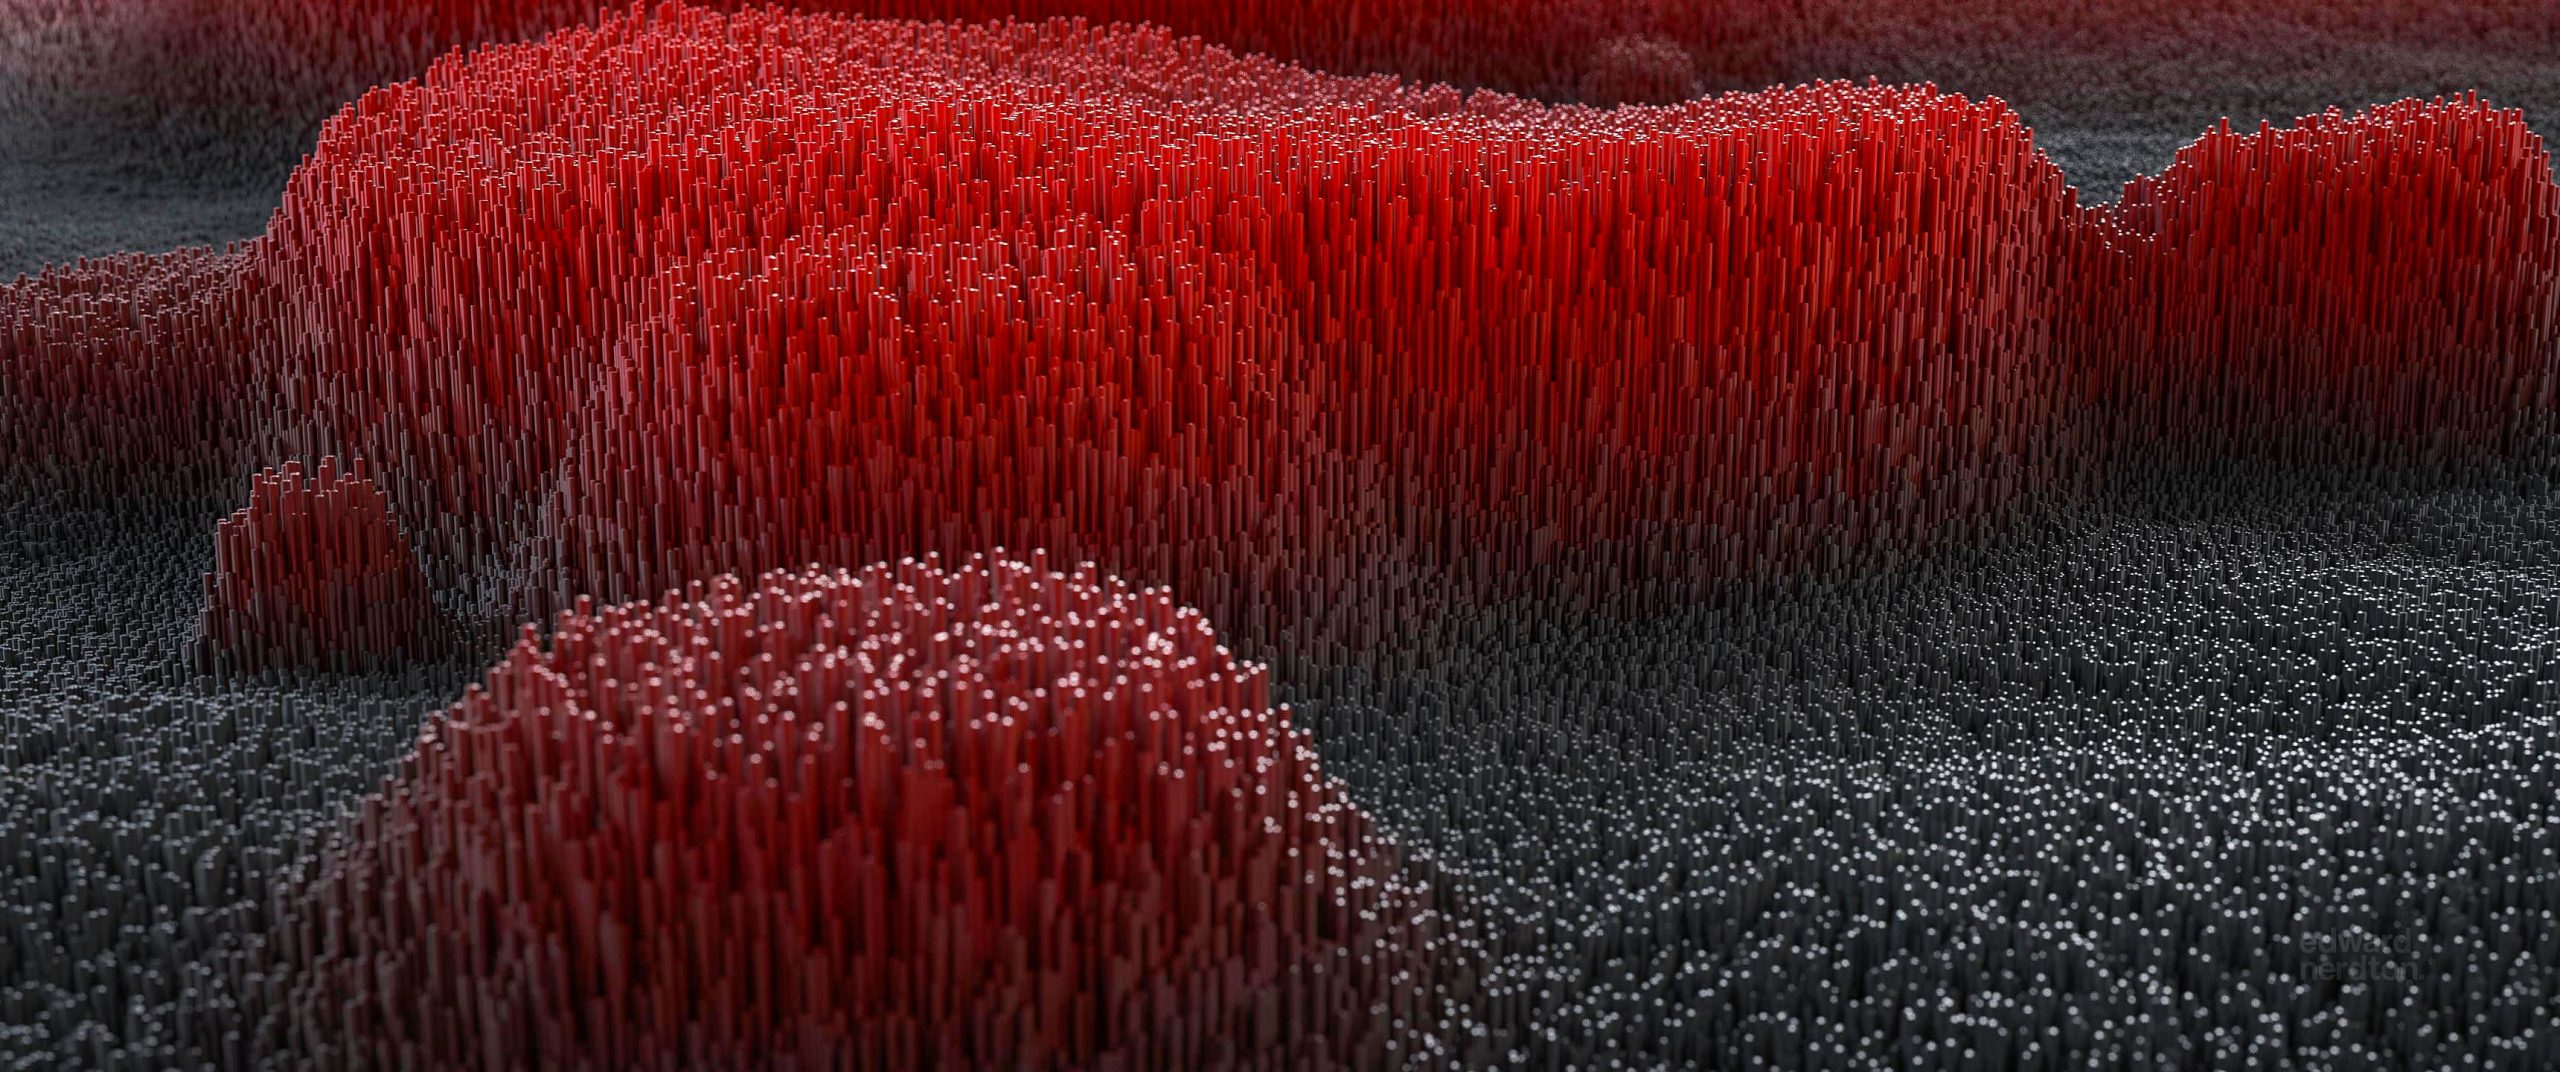 Wallpaper Red And Brown Fringe Textile, Abstract, 3d, 3D, Abstract